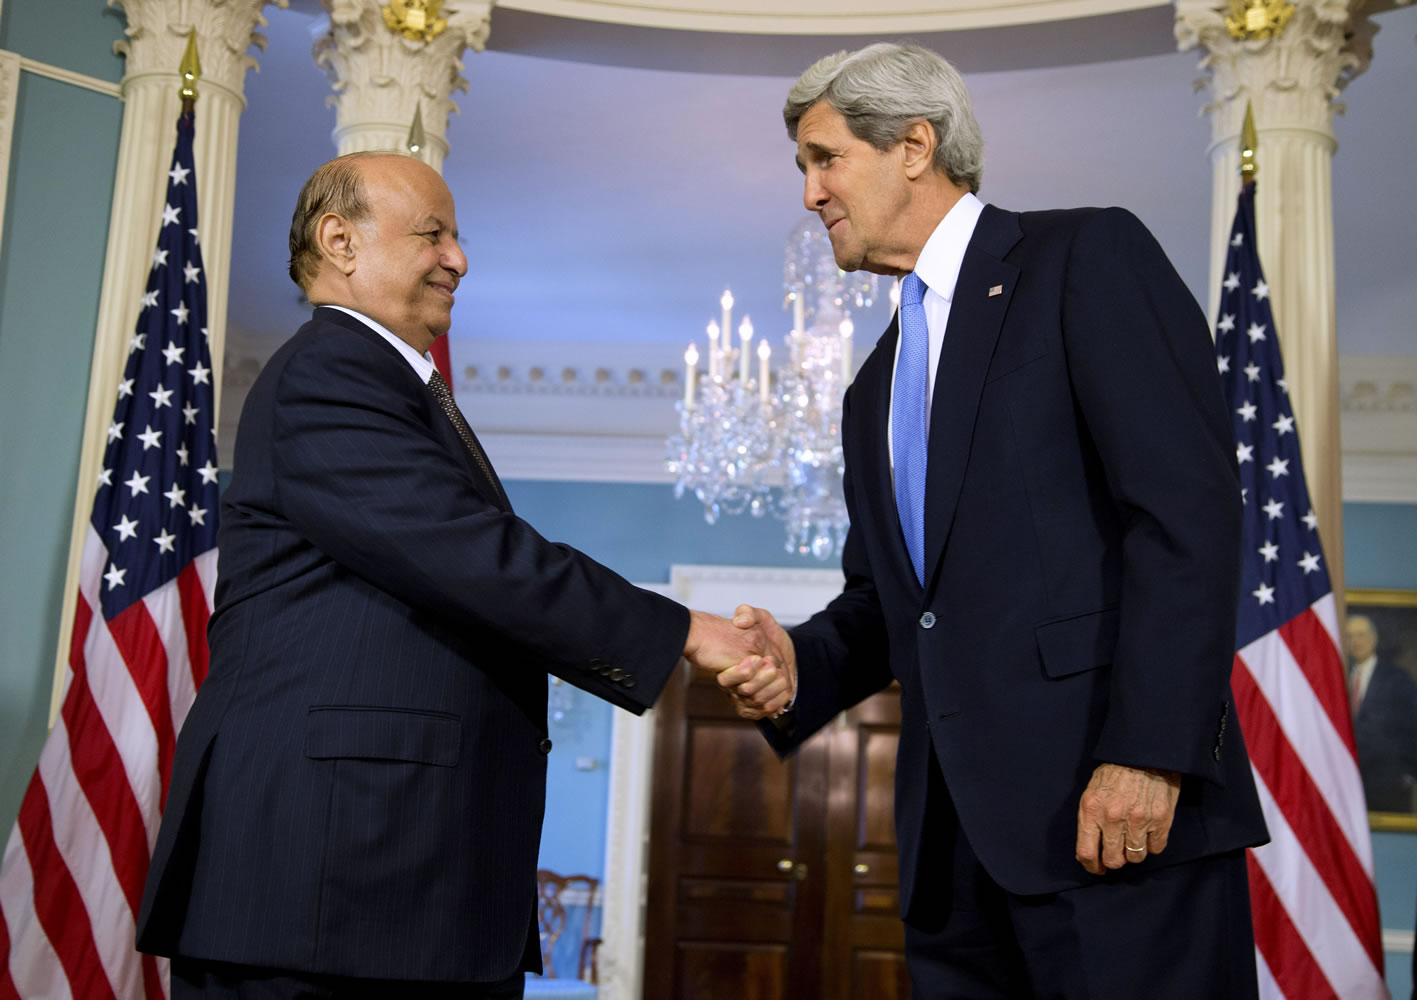 Secretary of State John Kerry shakes hands with Yemen's President Abed Rabbo Mansour Hadi on Monday at the State Department in Washington.